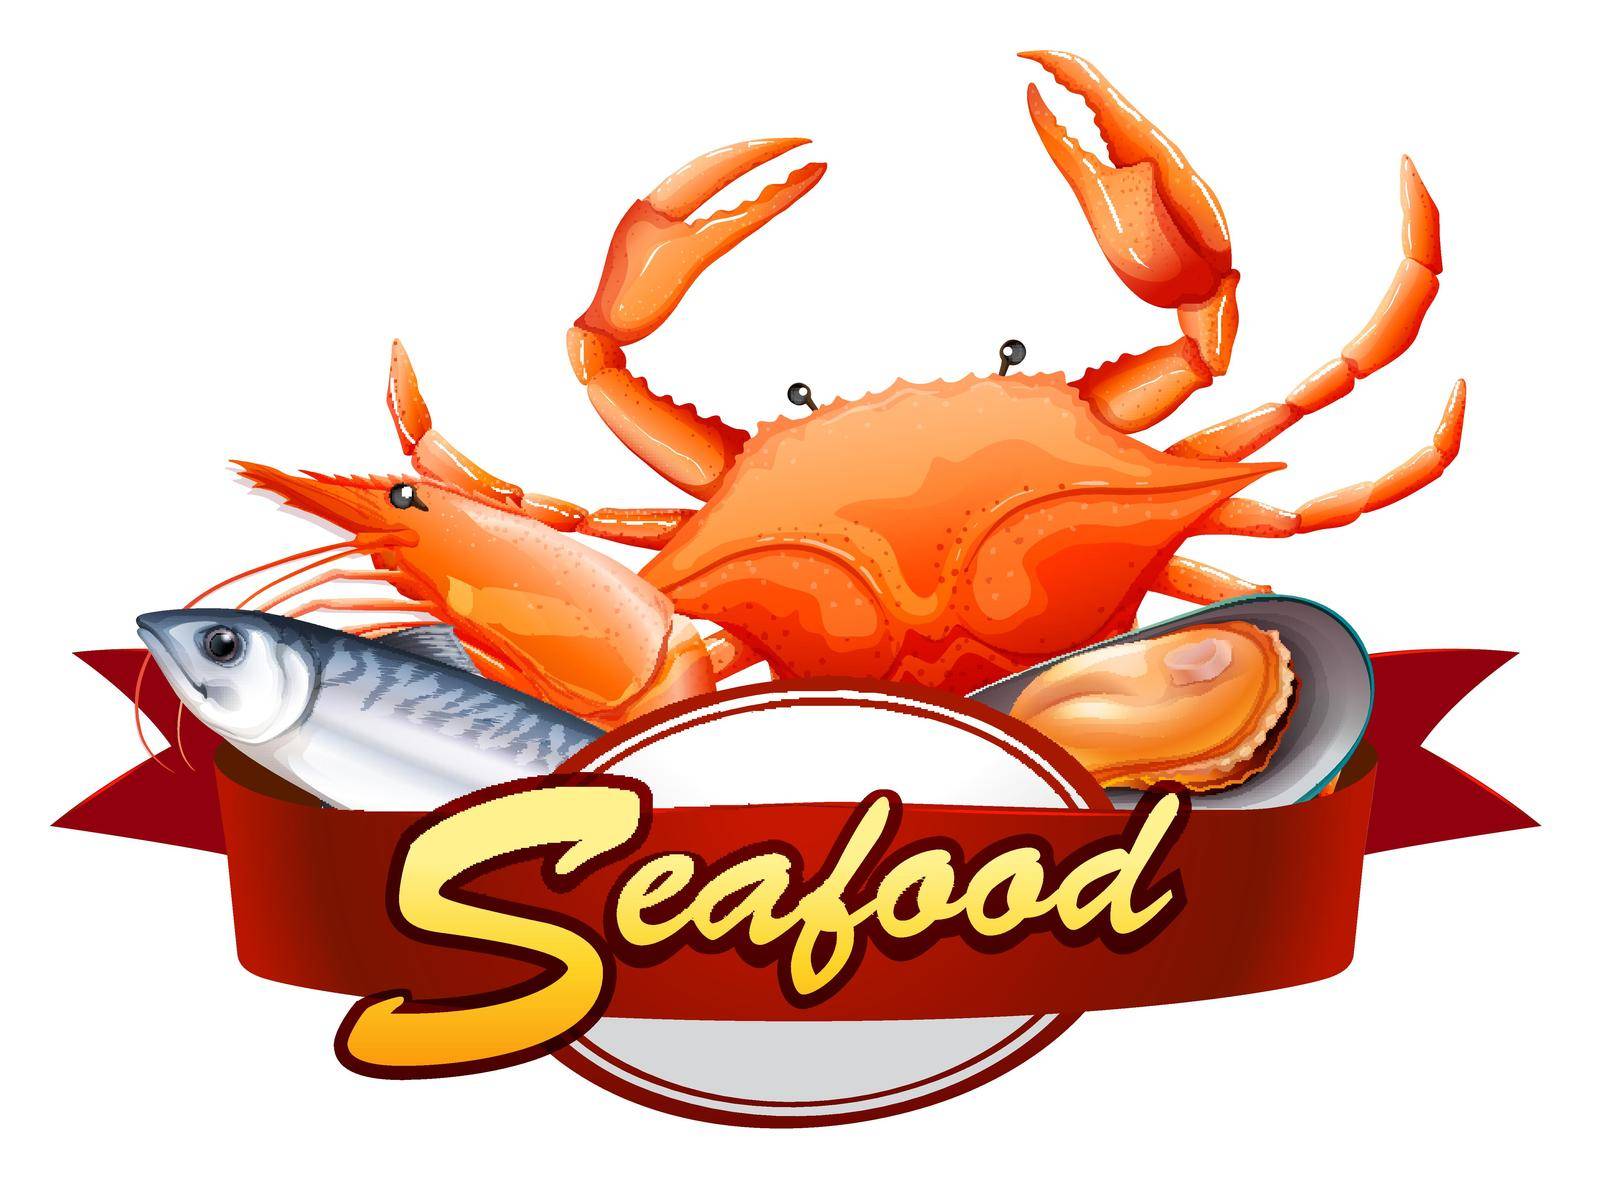 All kind of seafood with red banner